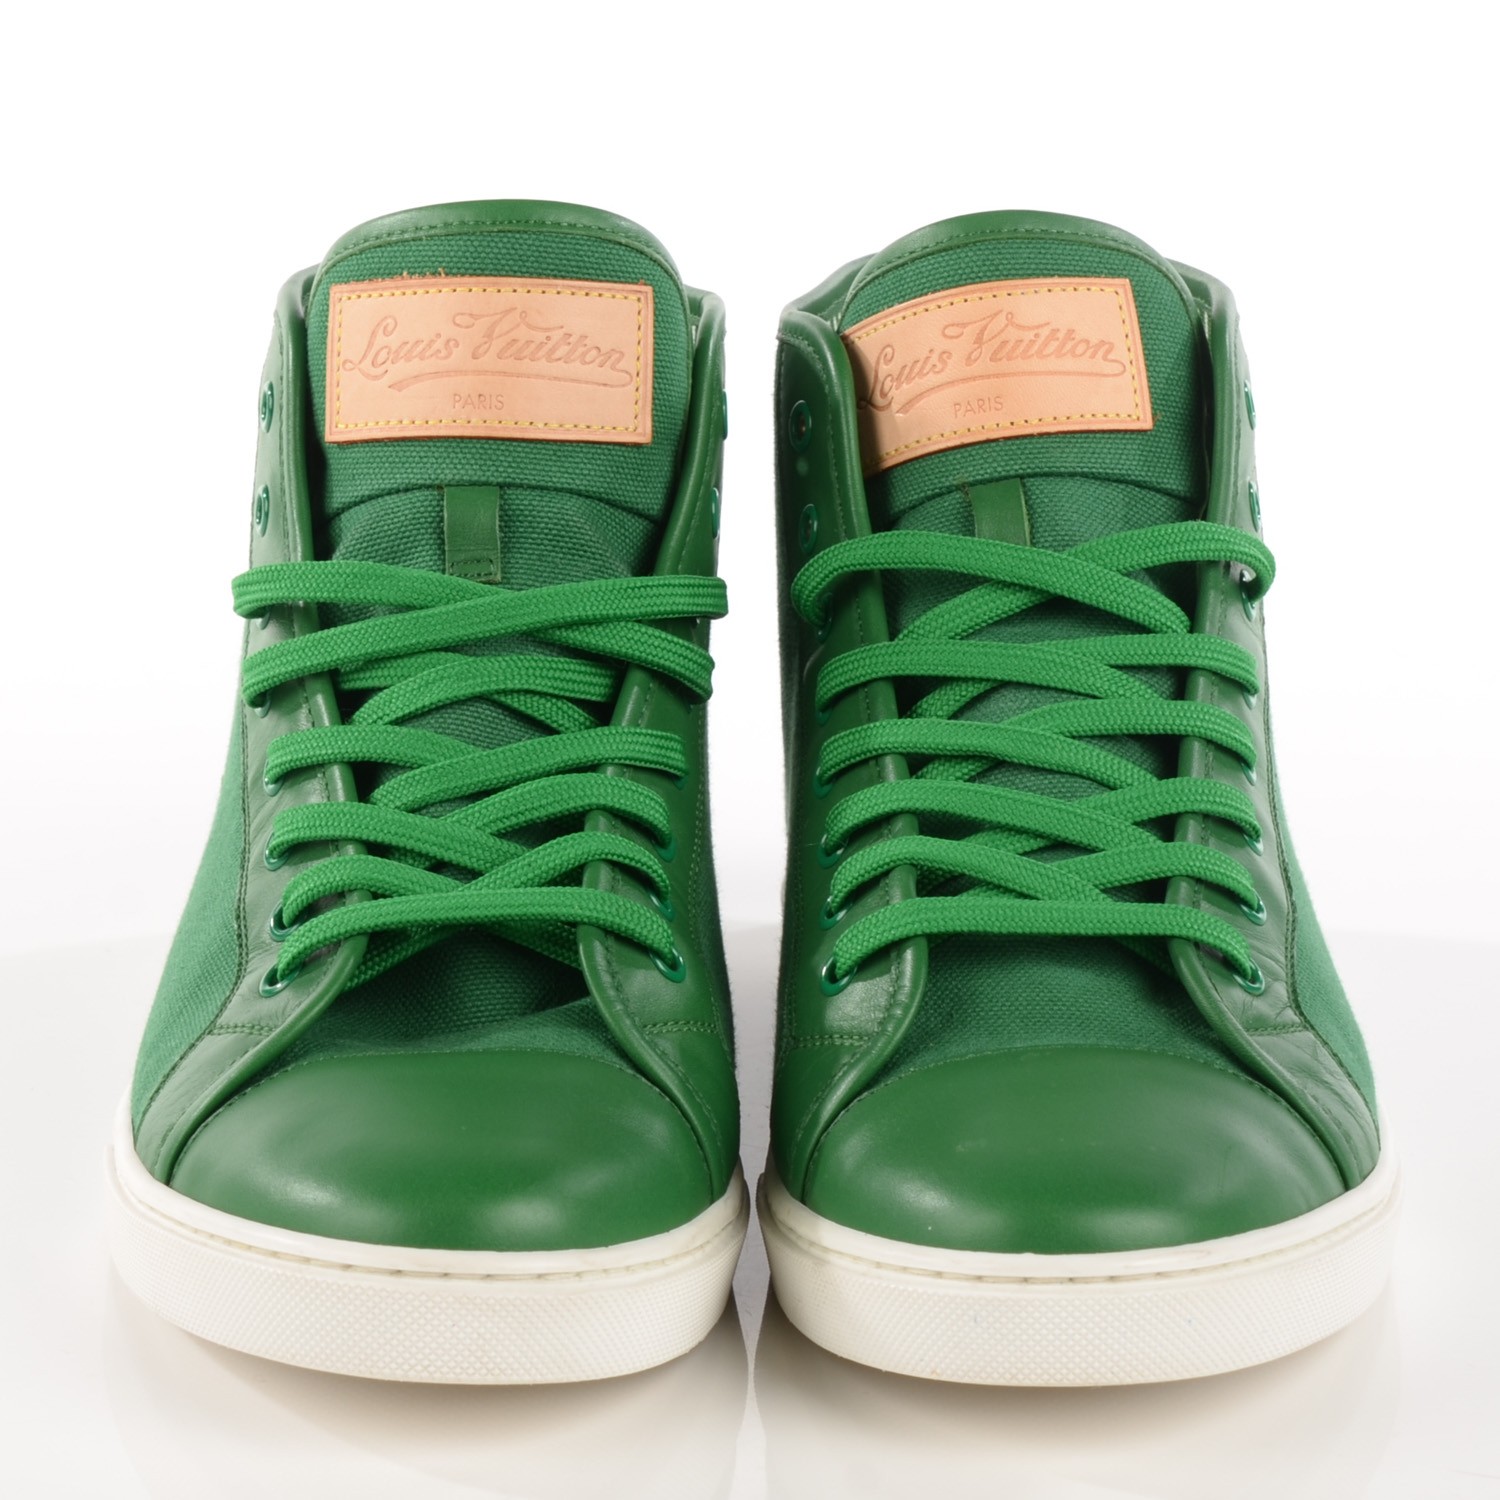 Louis Vuitton Leather Printed Sneakers - Green Sneakers, Shoes - LOU755423